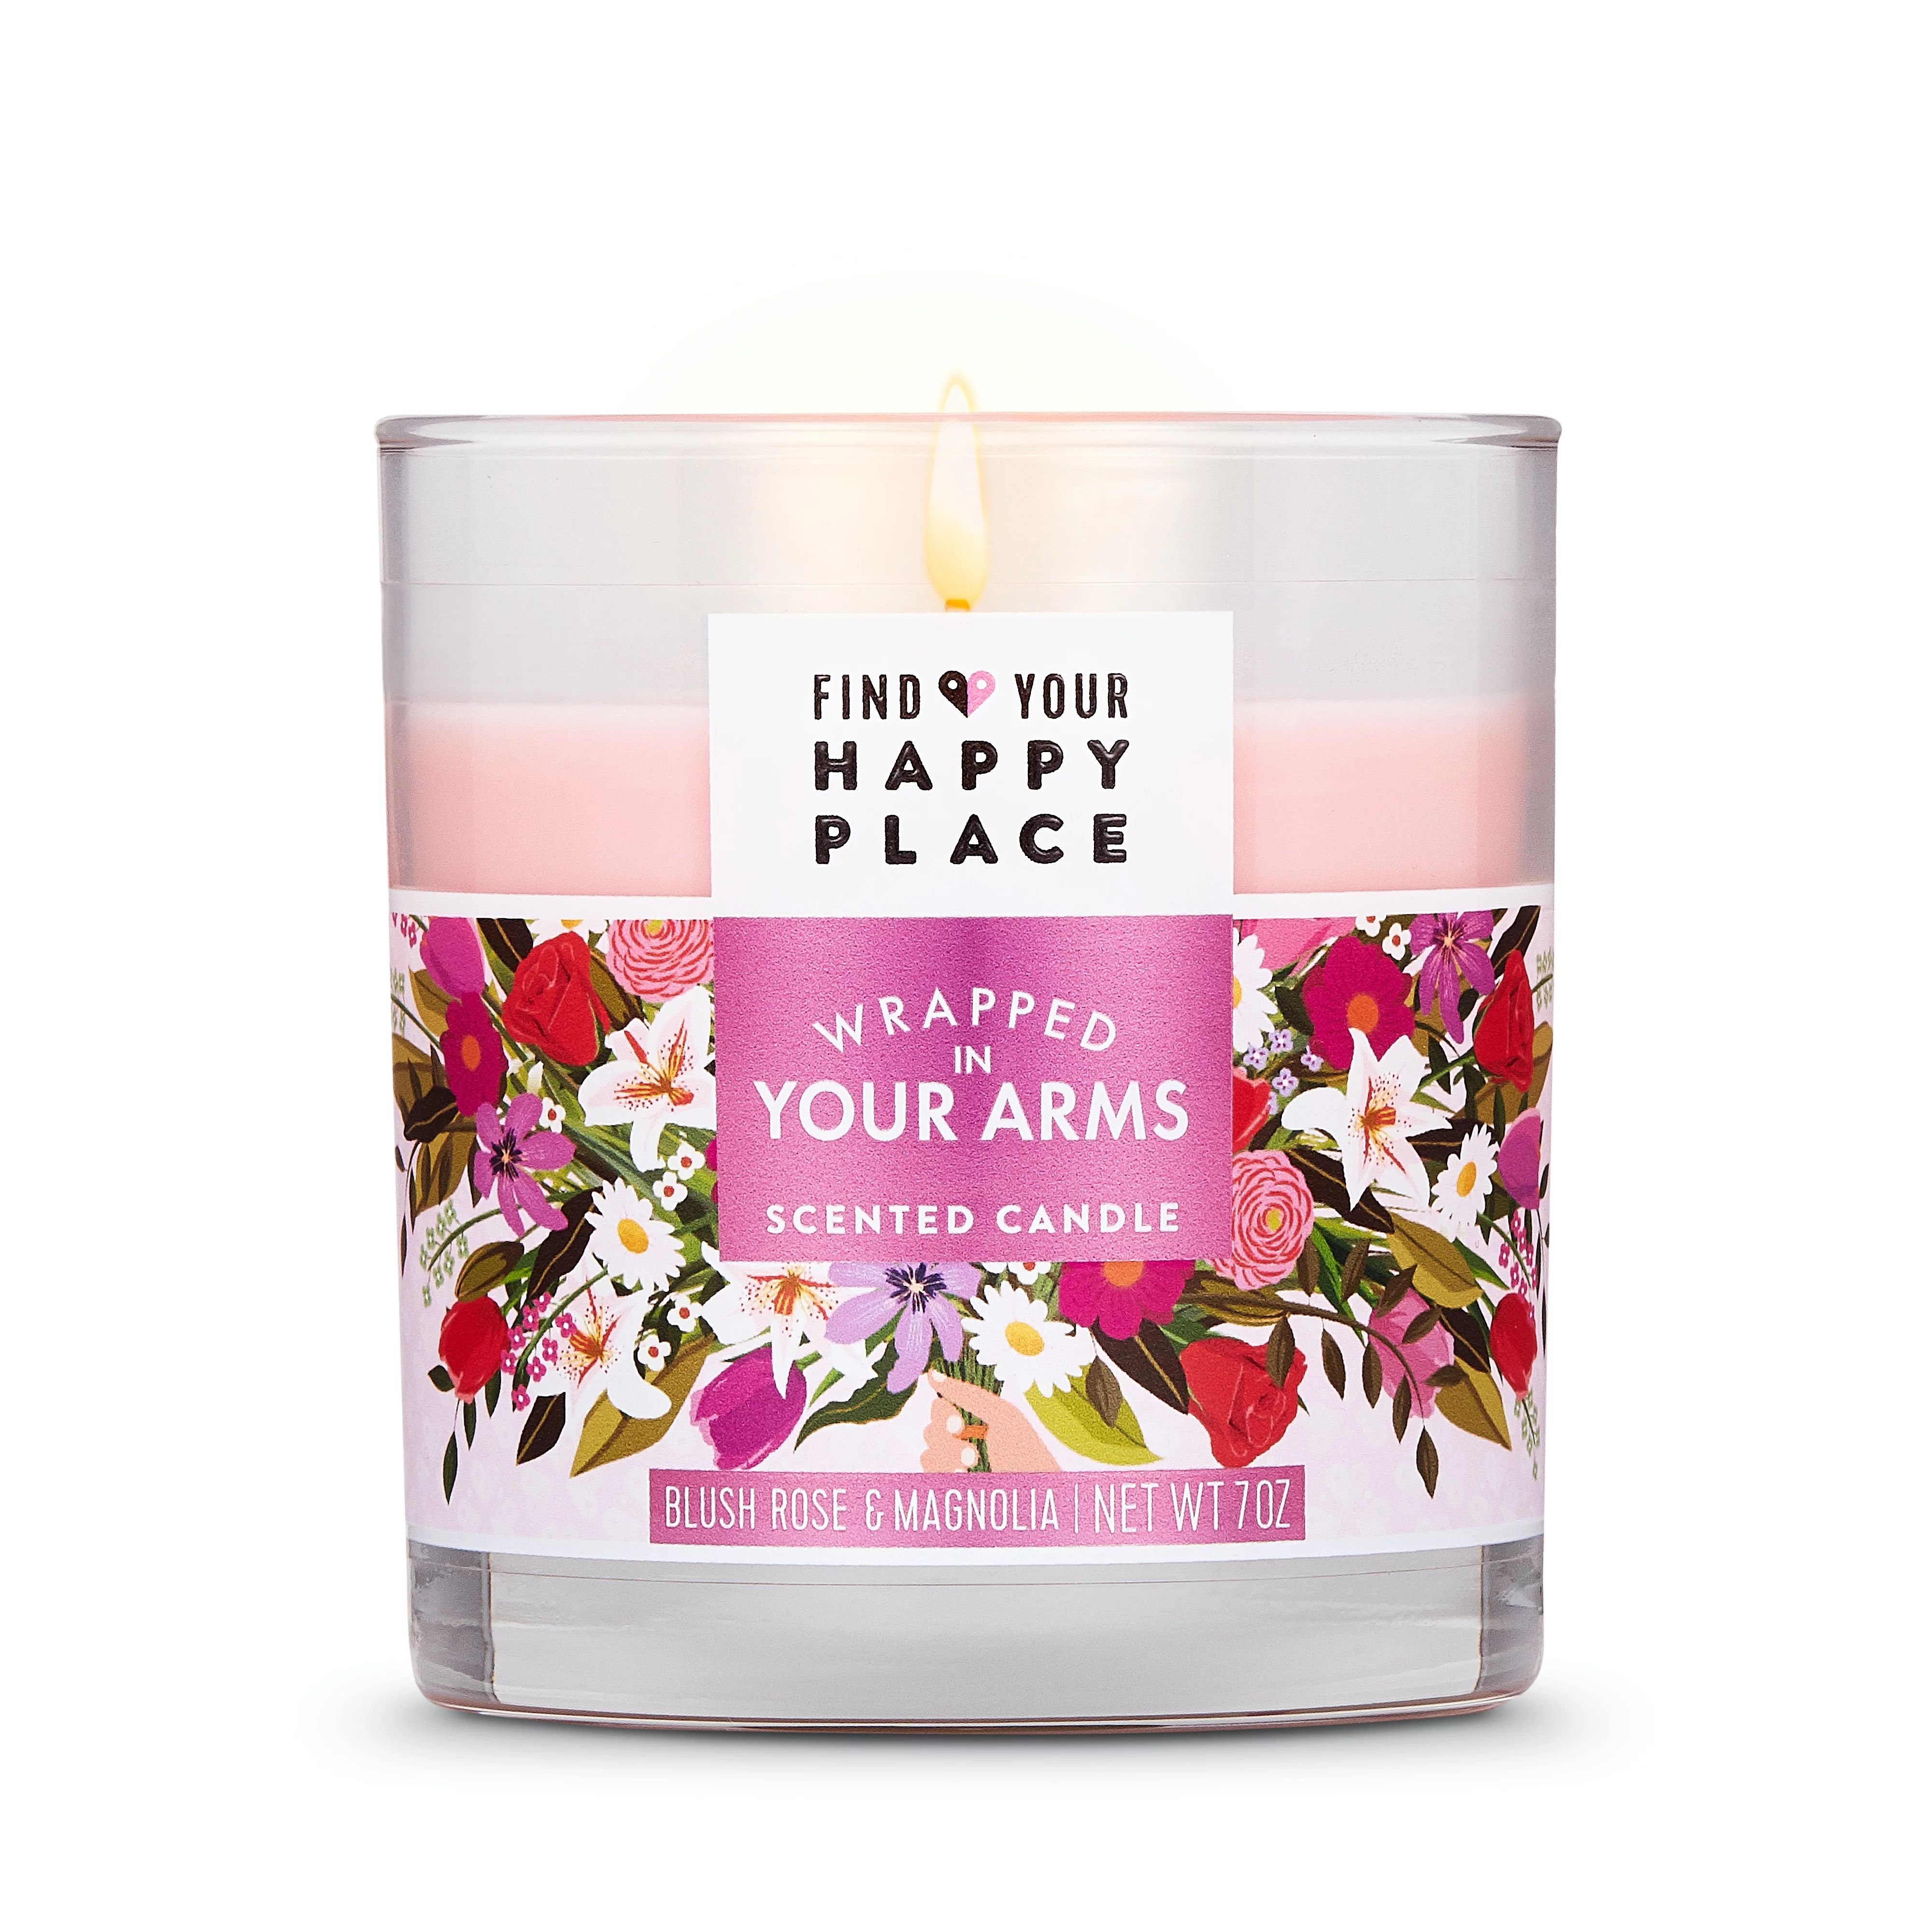 Find Your Happy Place Scented Jar Candle Wrapped In Your Arms Blush Rose and Magnolia,7 oz - Walm... | Walmart (US)